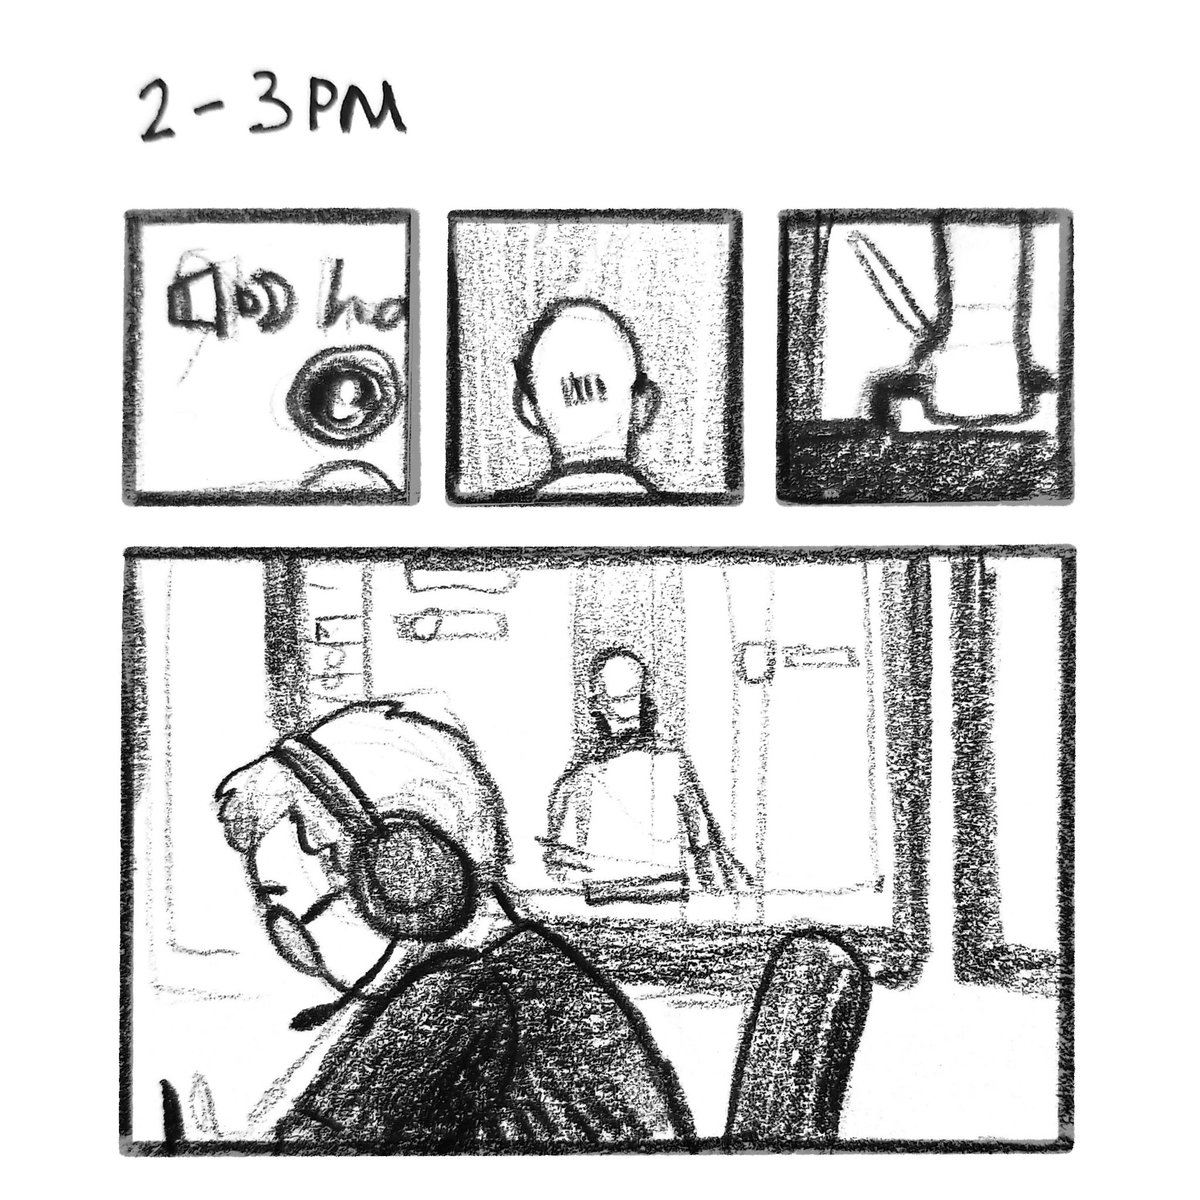 #hourlycomicday hangin in discord while chrispy plays Hitman 2 